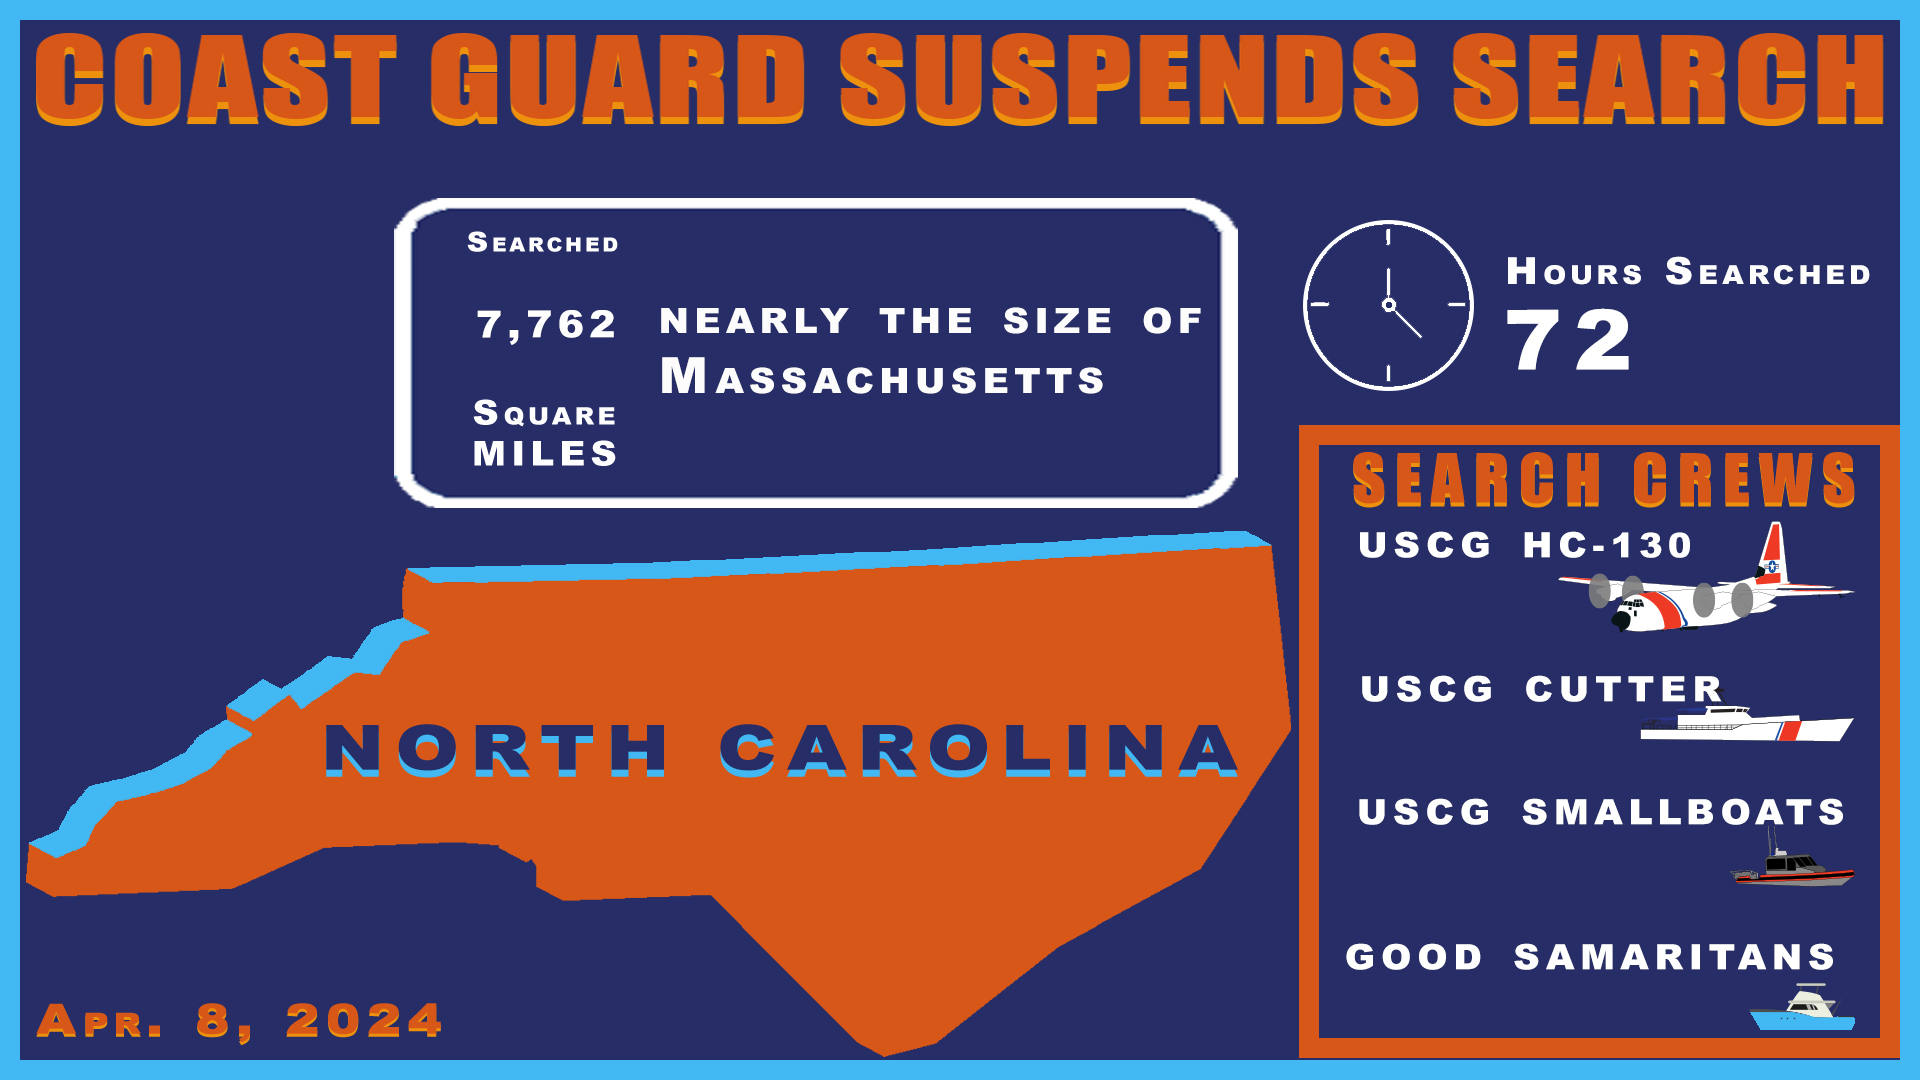 Coast Guard its search for Jeffrey Kale, 47, a missing boater April 8, 2024 at 8:20 p.m., after searching for approximately 72 combined hours, covering more than 7,762 square miles along the North Carolina coast.